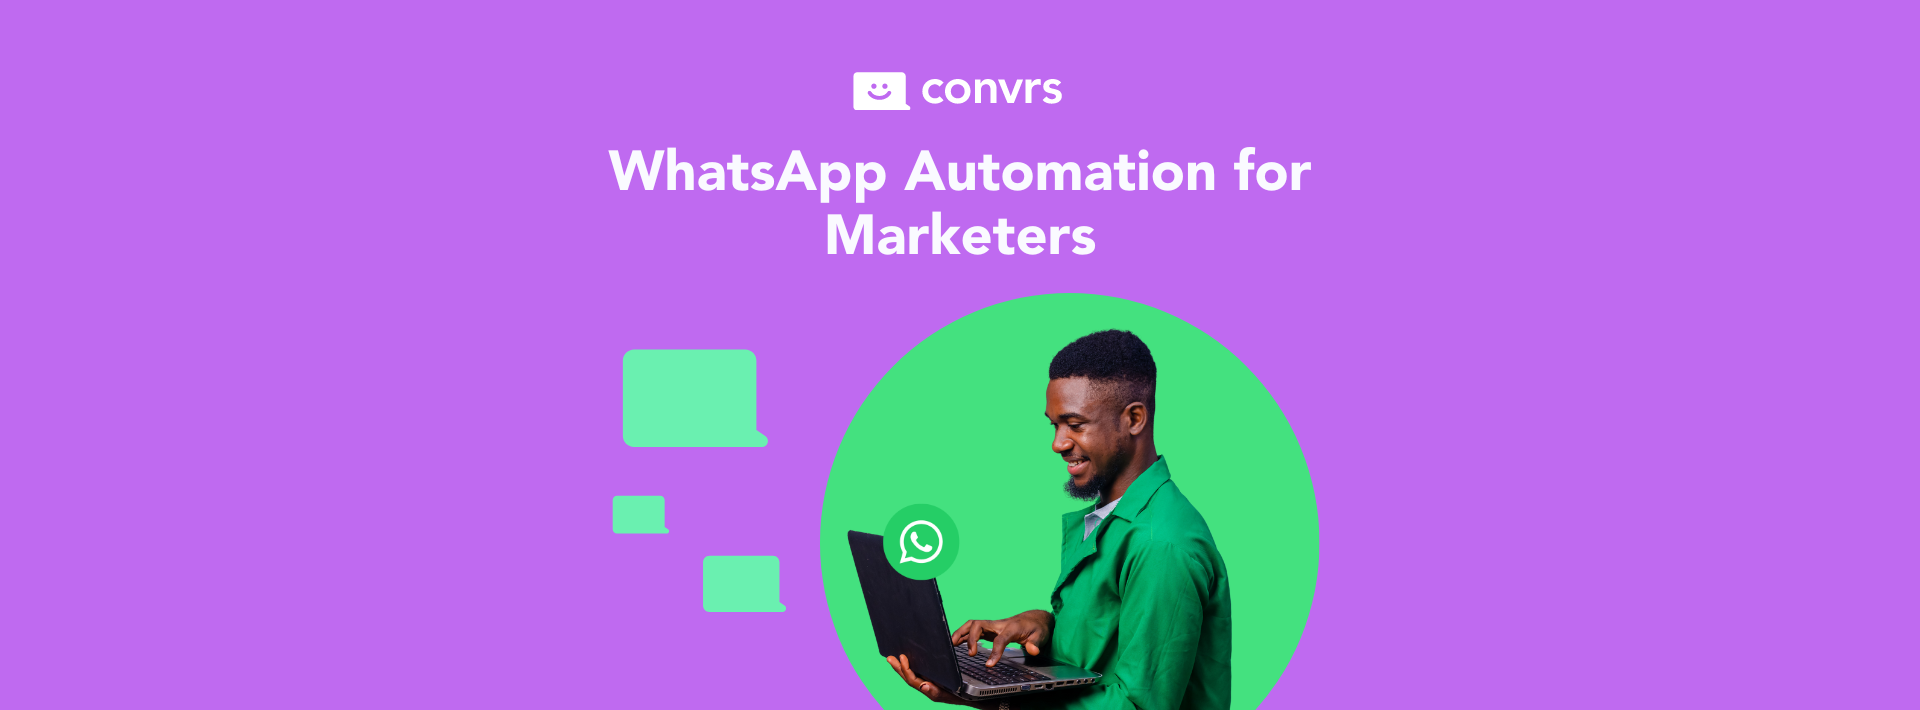 Marketing Professional or Marketer using WhatsApp Automation for Marketing